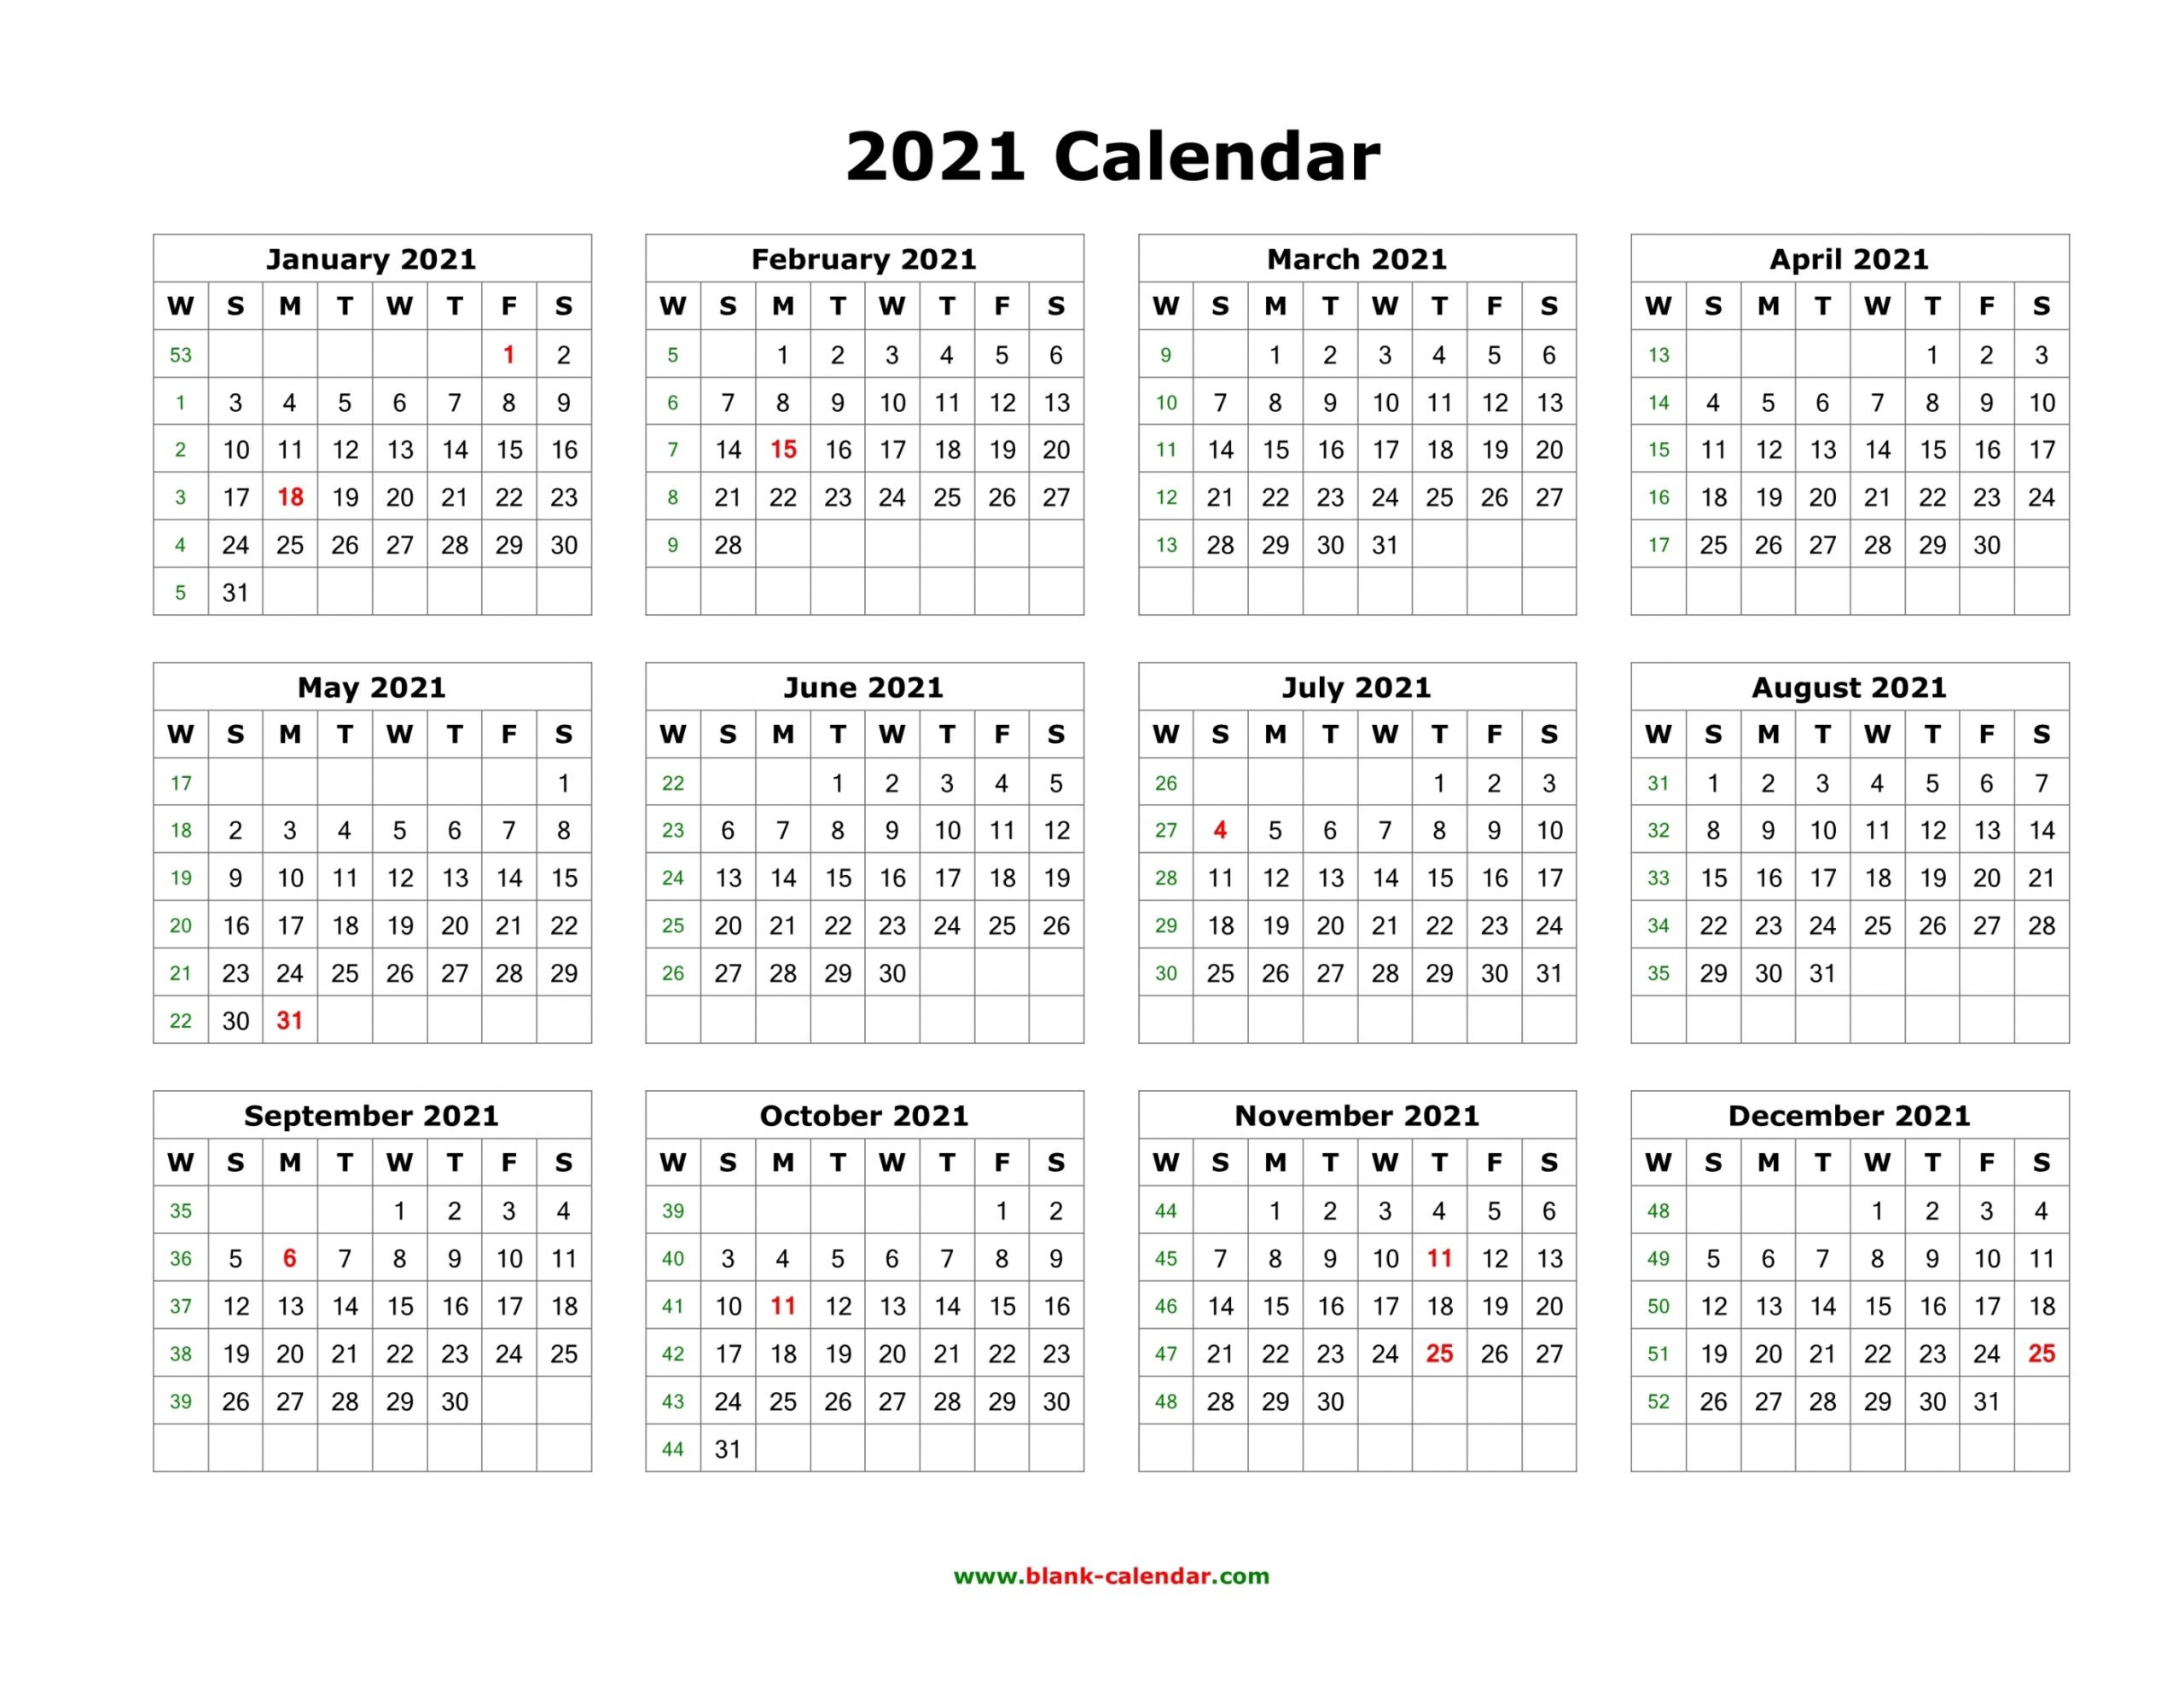 2021 Calendar One Page Template | Free Letter Templates-Free Printable Calendar 2021 In 4X6